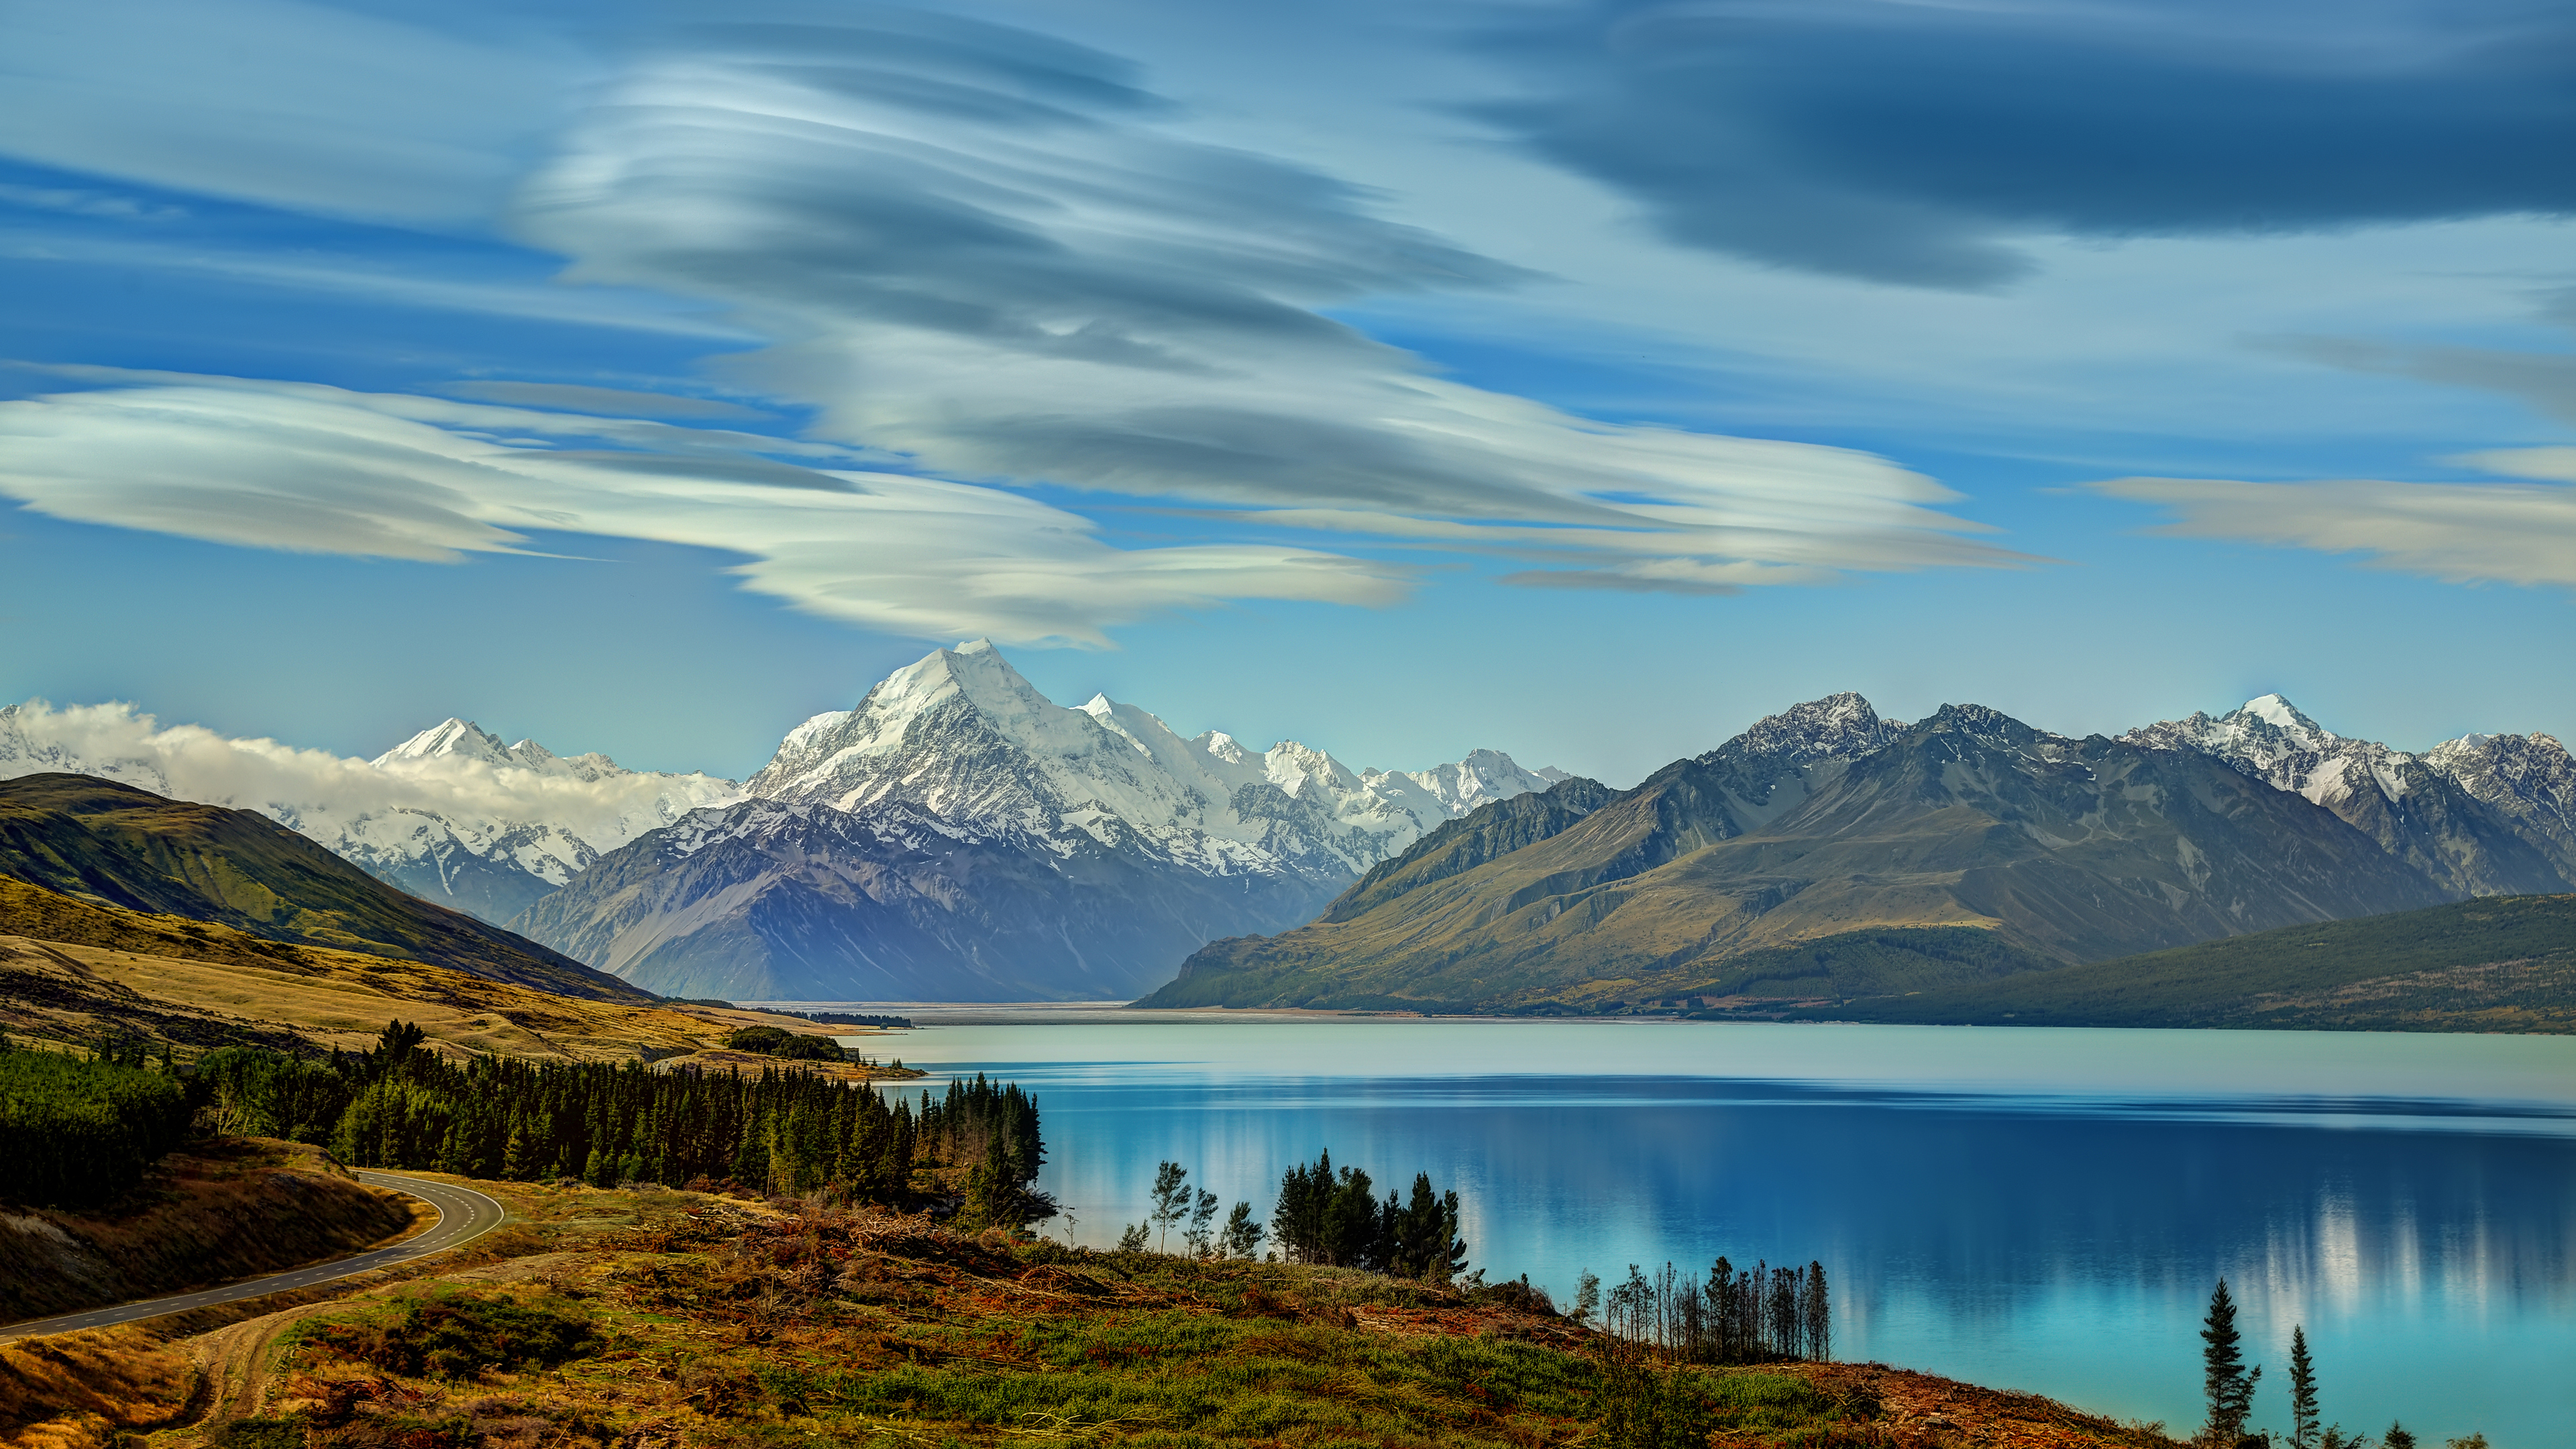 Trey Ratcliff Photography Landscape New Zealand Nature Mountains Snow Sky Water Clouds Trees 3840x2160